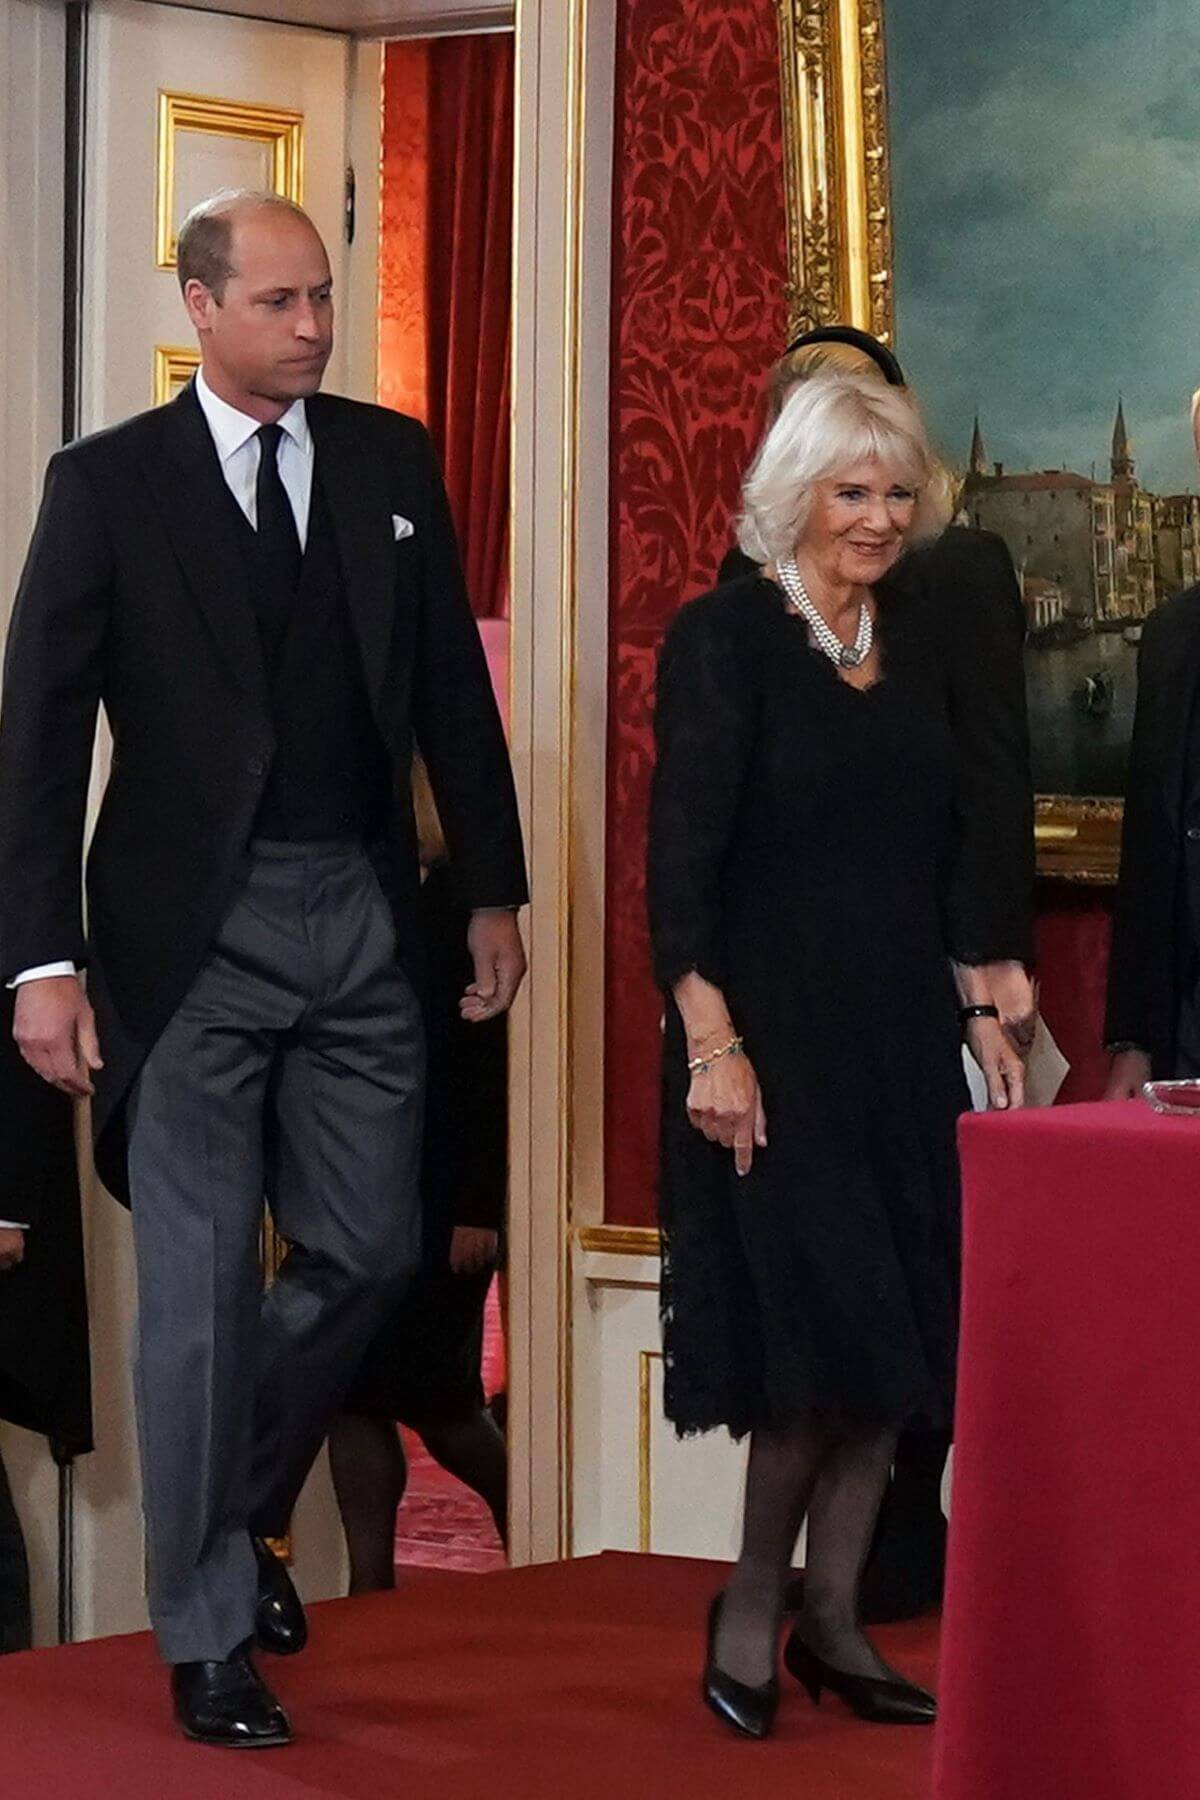 Prince William and Queen Camilla arrive at the Throne Room during the Accession Council ceremony at St. James's Palace for the proclamation of King Charles III